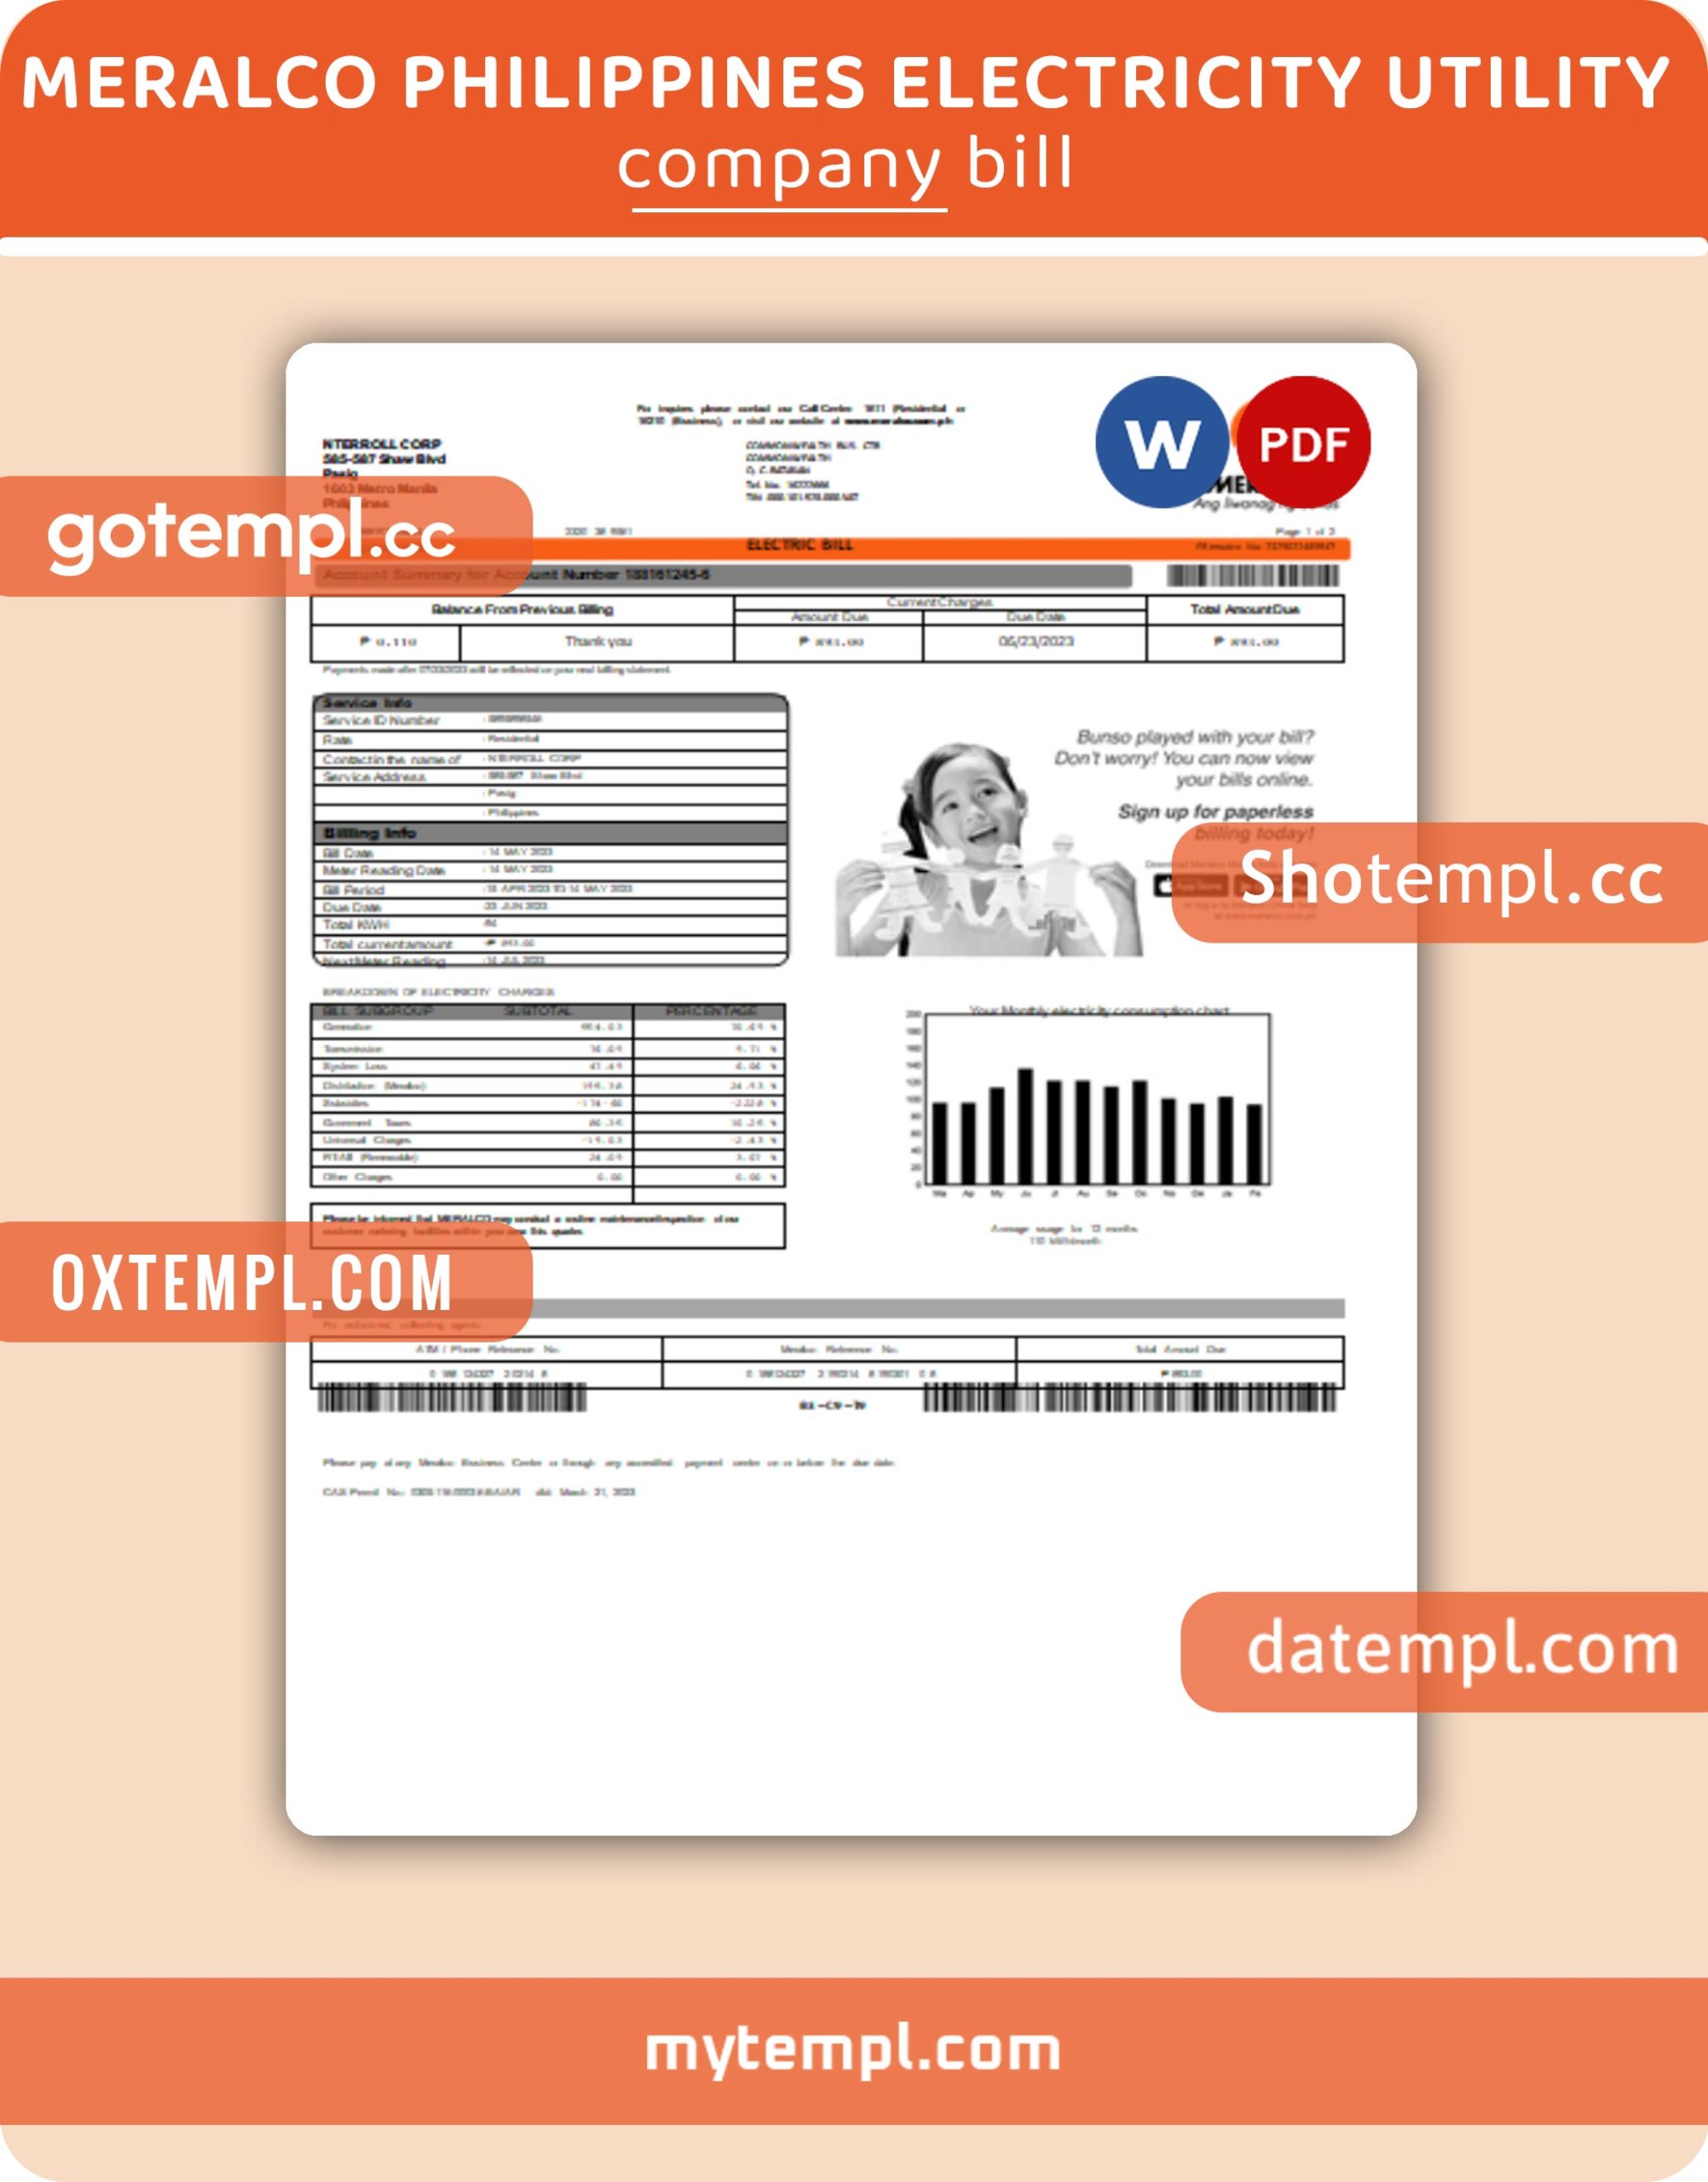 Meralco Philippines electricity business utility bill, Word and PDF template, 2 pages